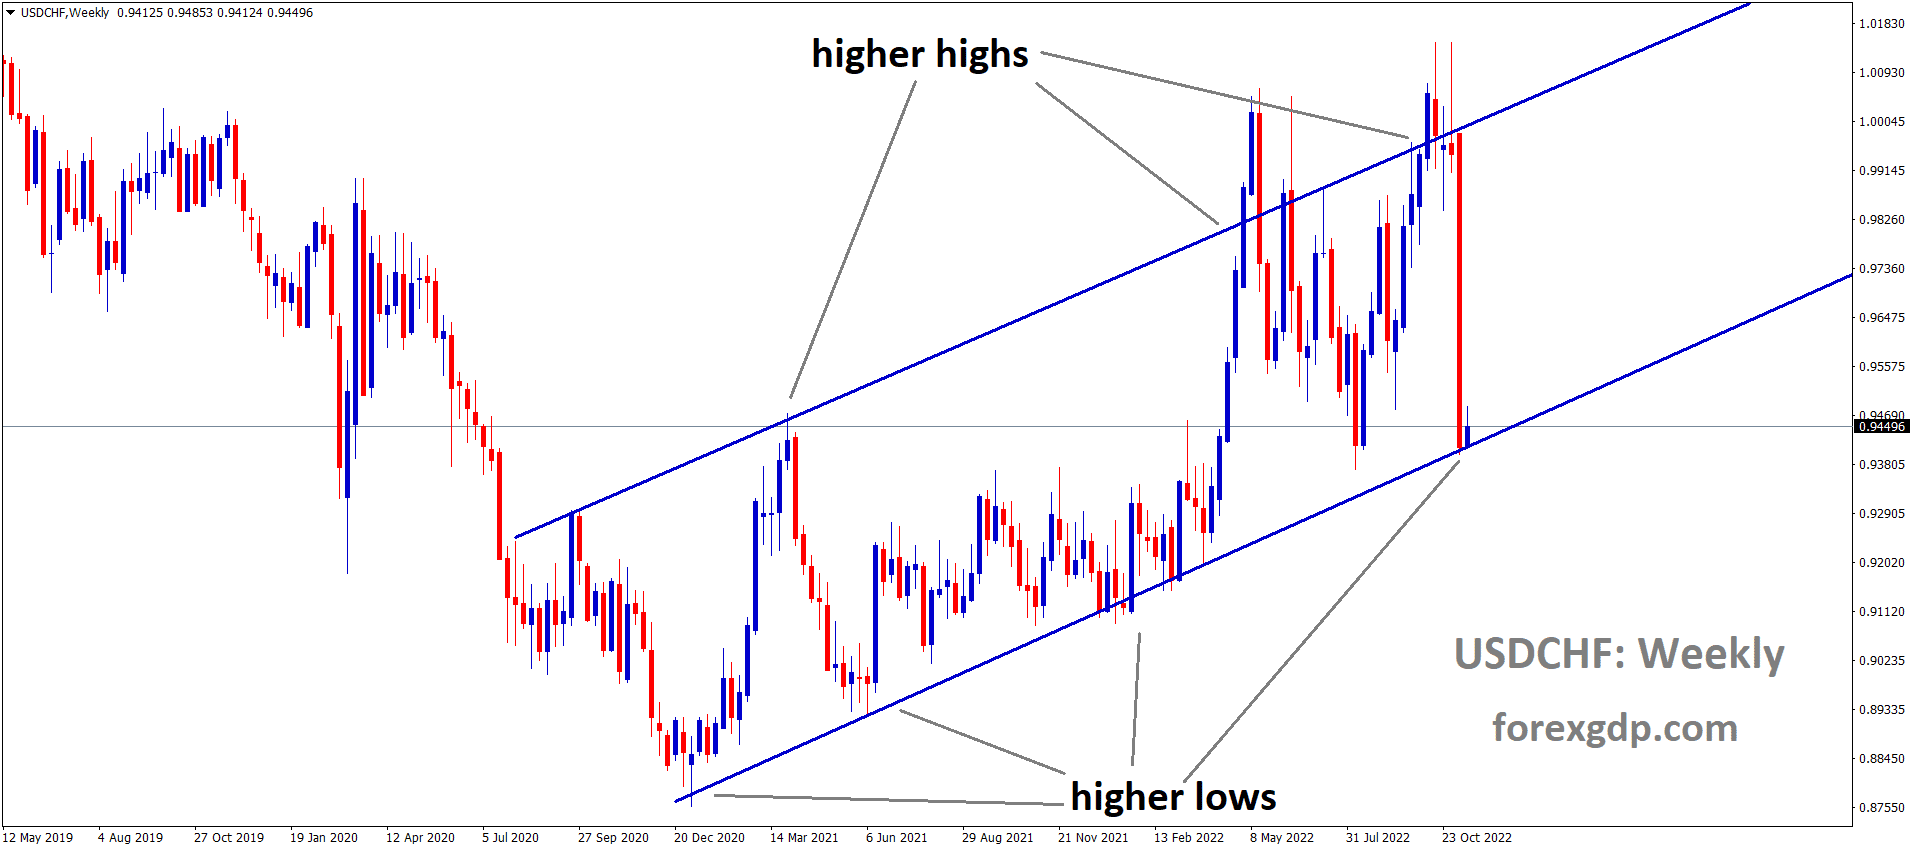 USDCHF is moving in an Ascending channel and the market has reached the higher low area of the channel 2